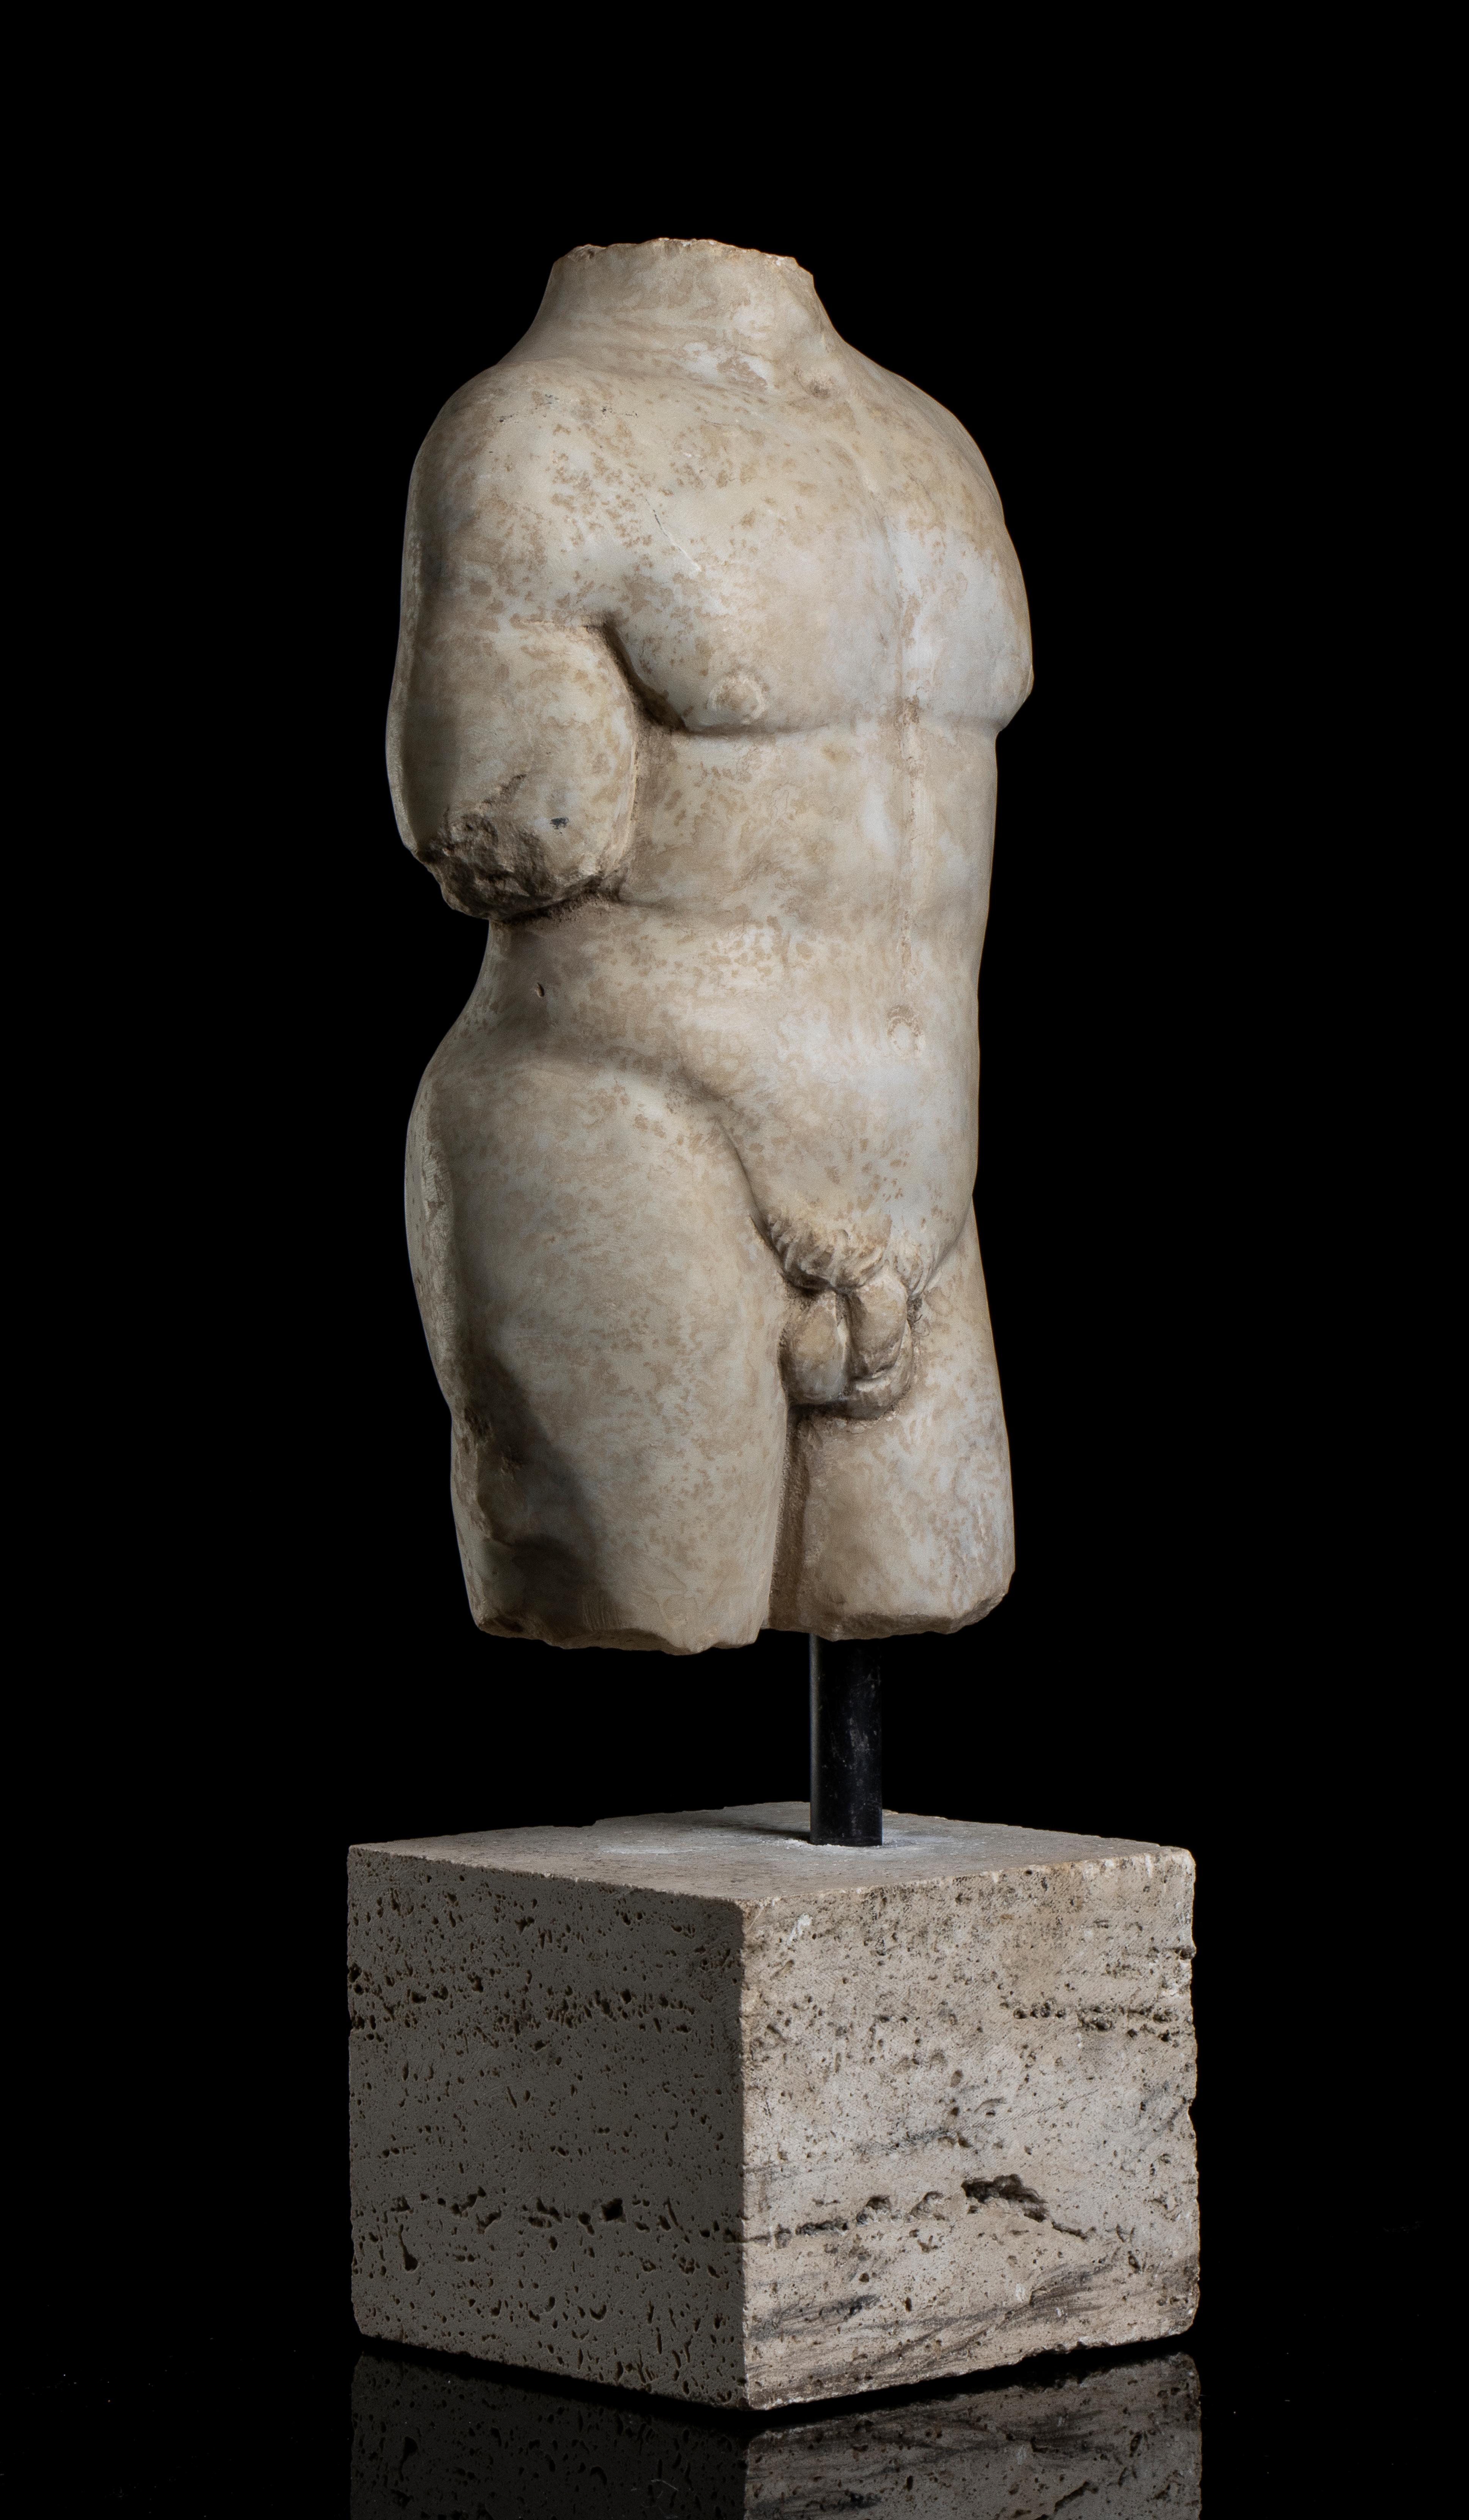 An aged statuary classical greek roman marble torso sculpture of an athlete, grand tour style central Italy early 20th century.
The  nude body of the athlete standing on his right leg with the left one advanced in contrapposto position, the